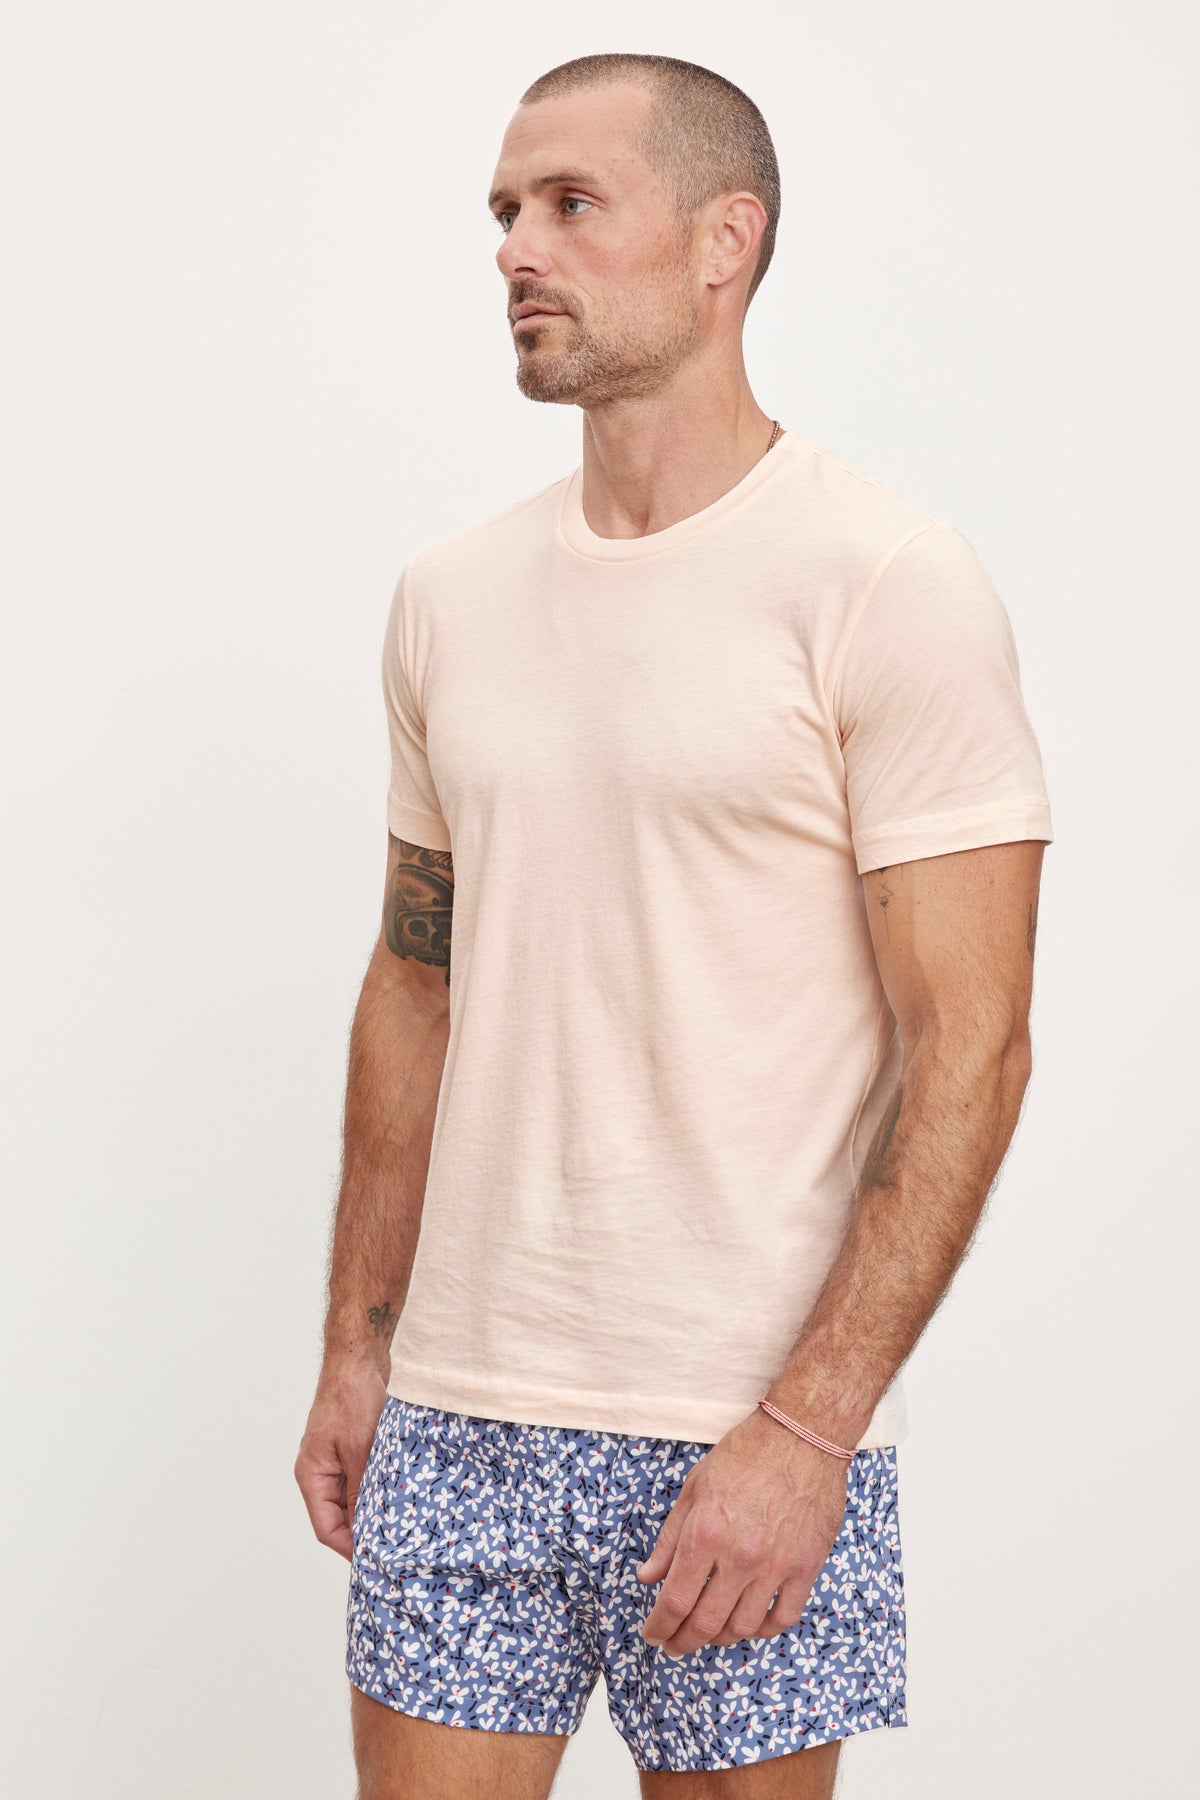 A man in a beige, 100% cotton Velvet by Graham & Spencer RANDY CREW NECK TEE and blue floral shorts standing against a white background, looking to his left.-36753568530625